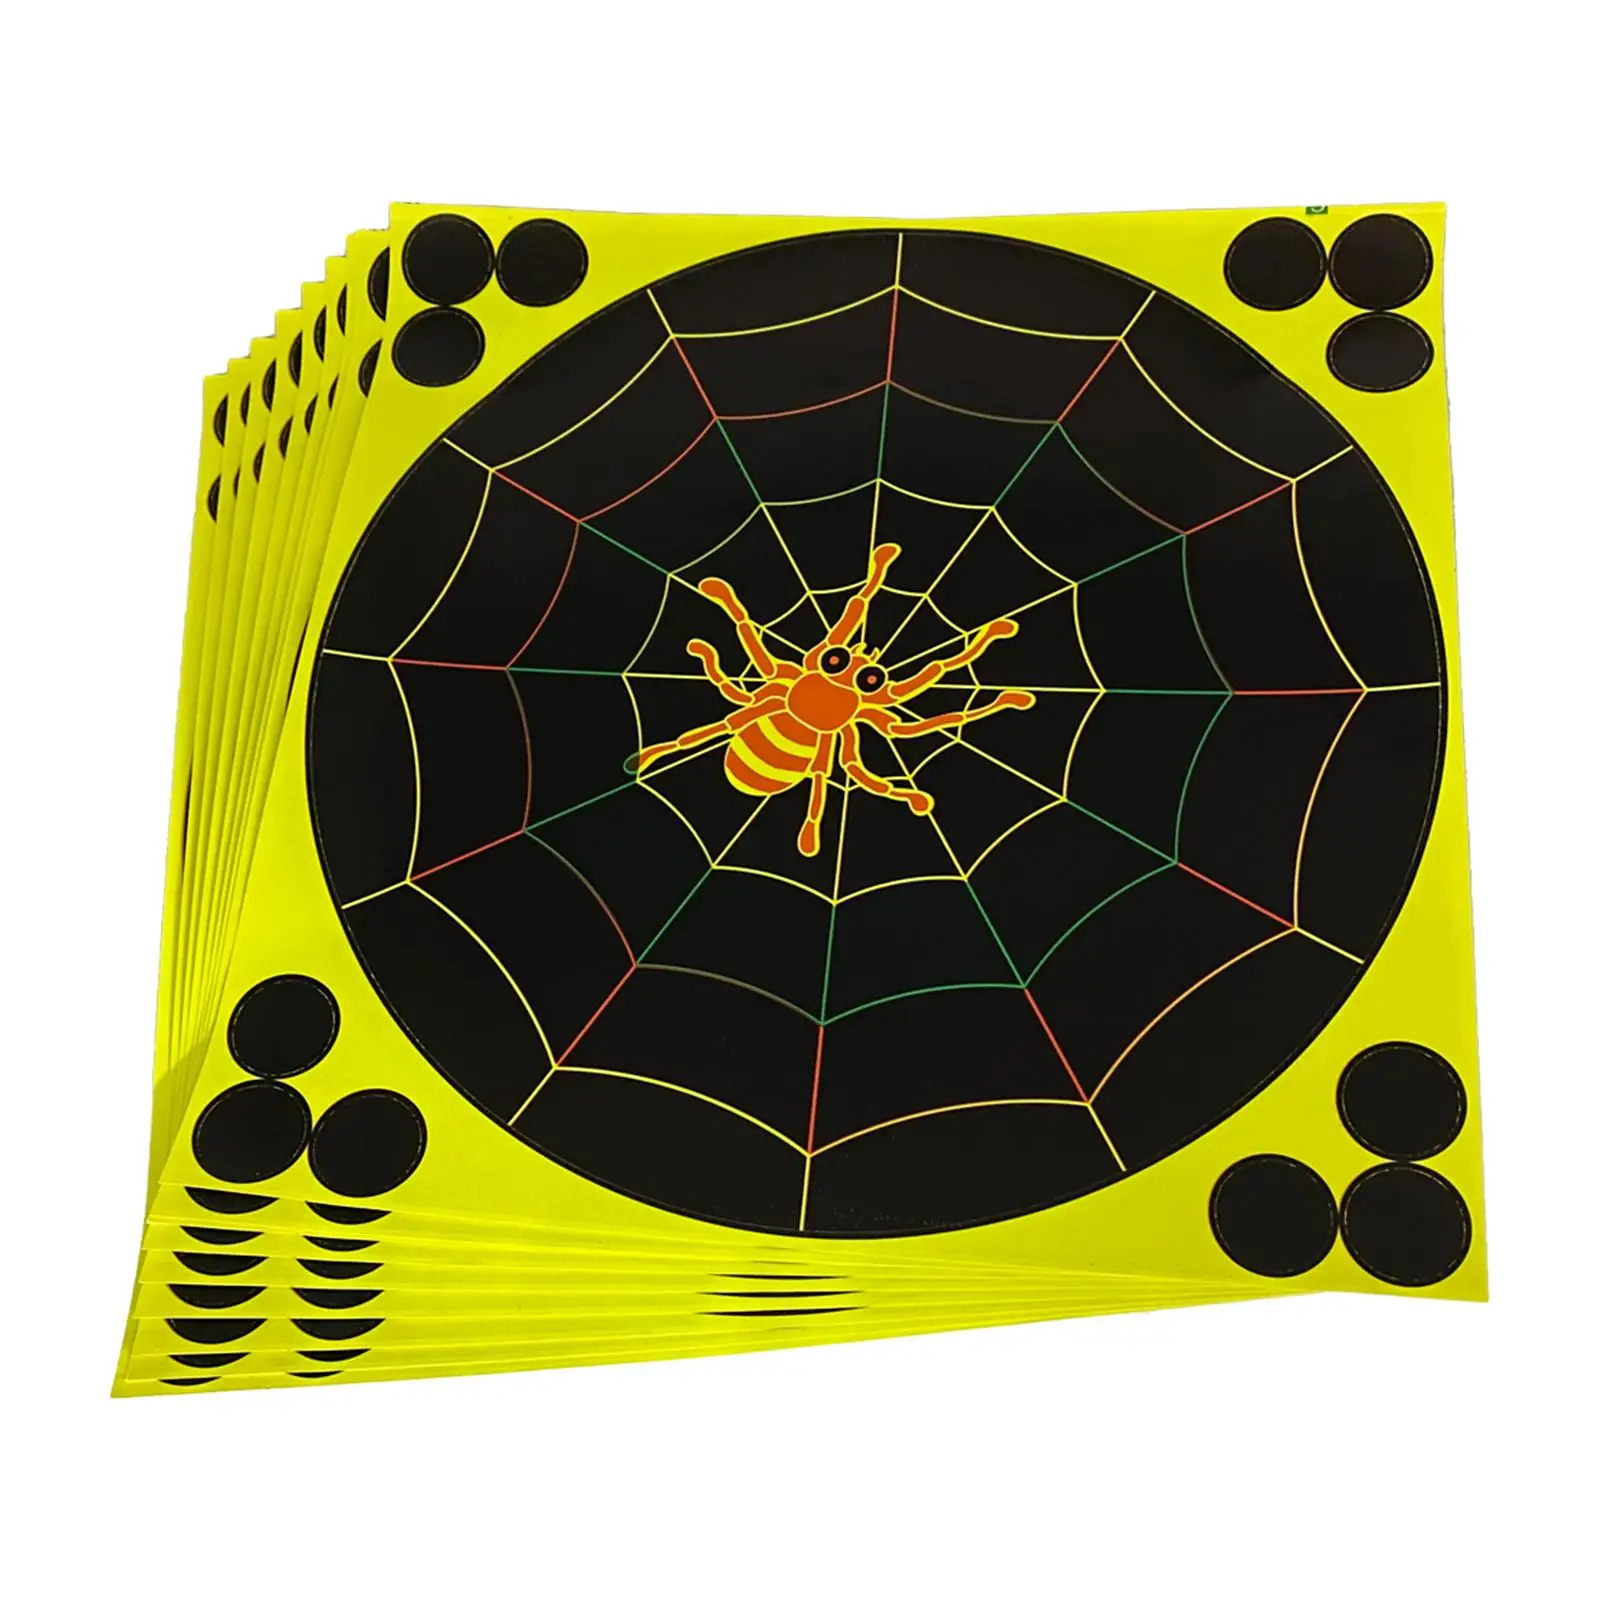  Target Sticker     12 Inch  Target  Strength  Game  Accessories